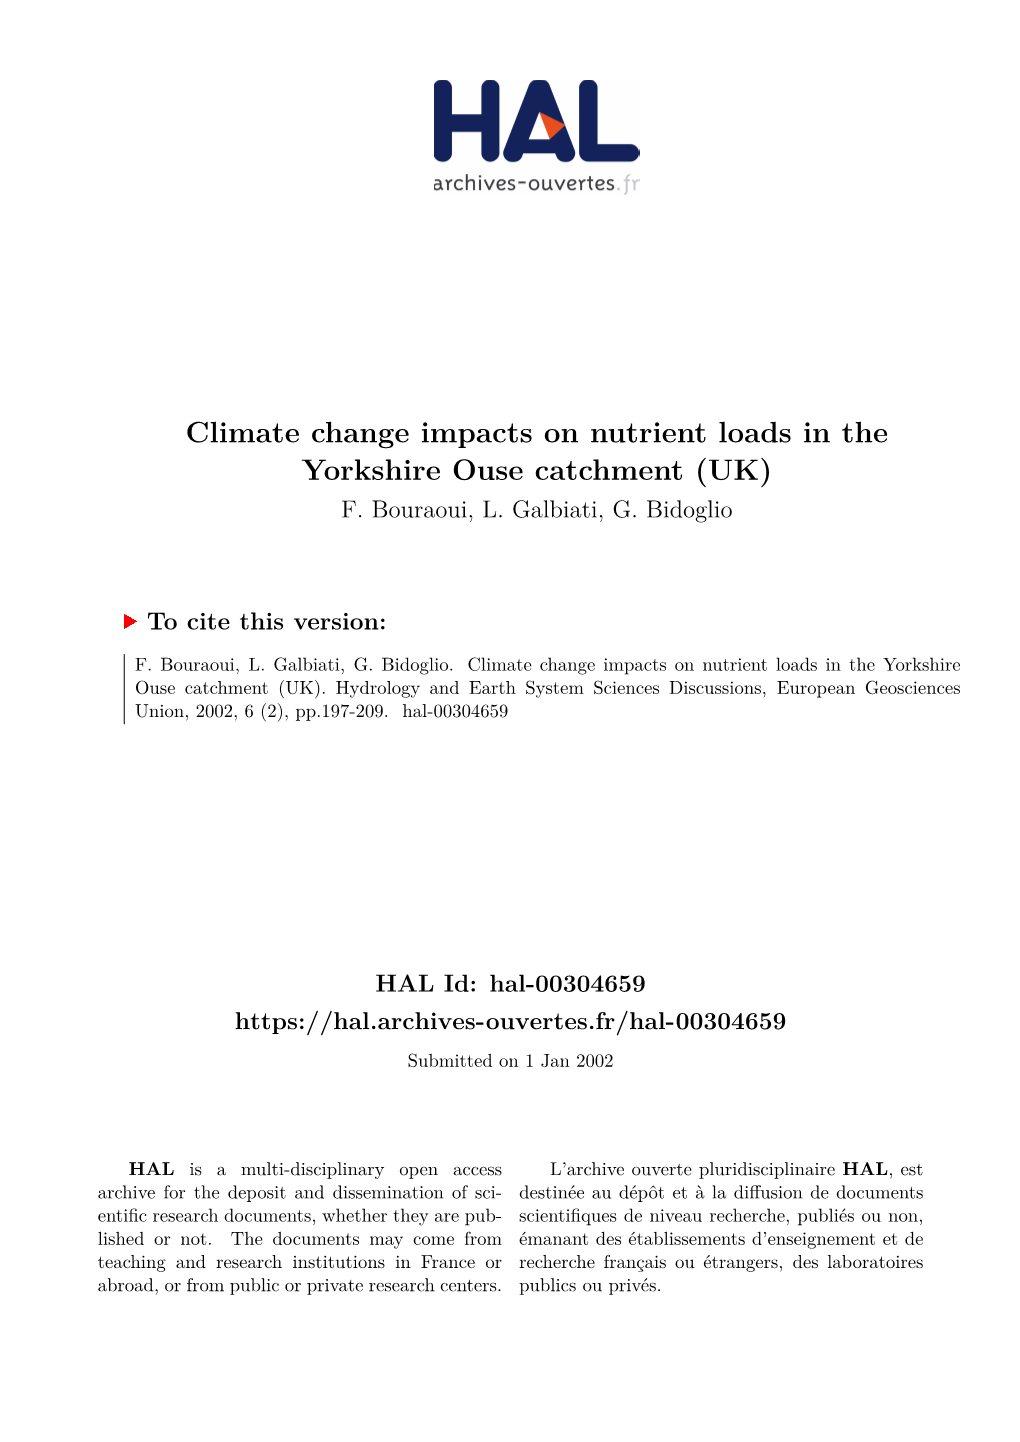 Climate Change Impacts on Nutrient Loads in the Yorkshire Ouse Catchment (UK) F